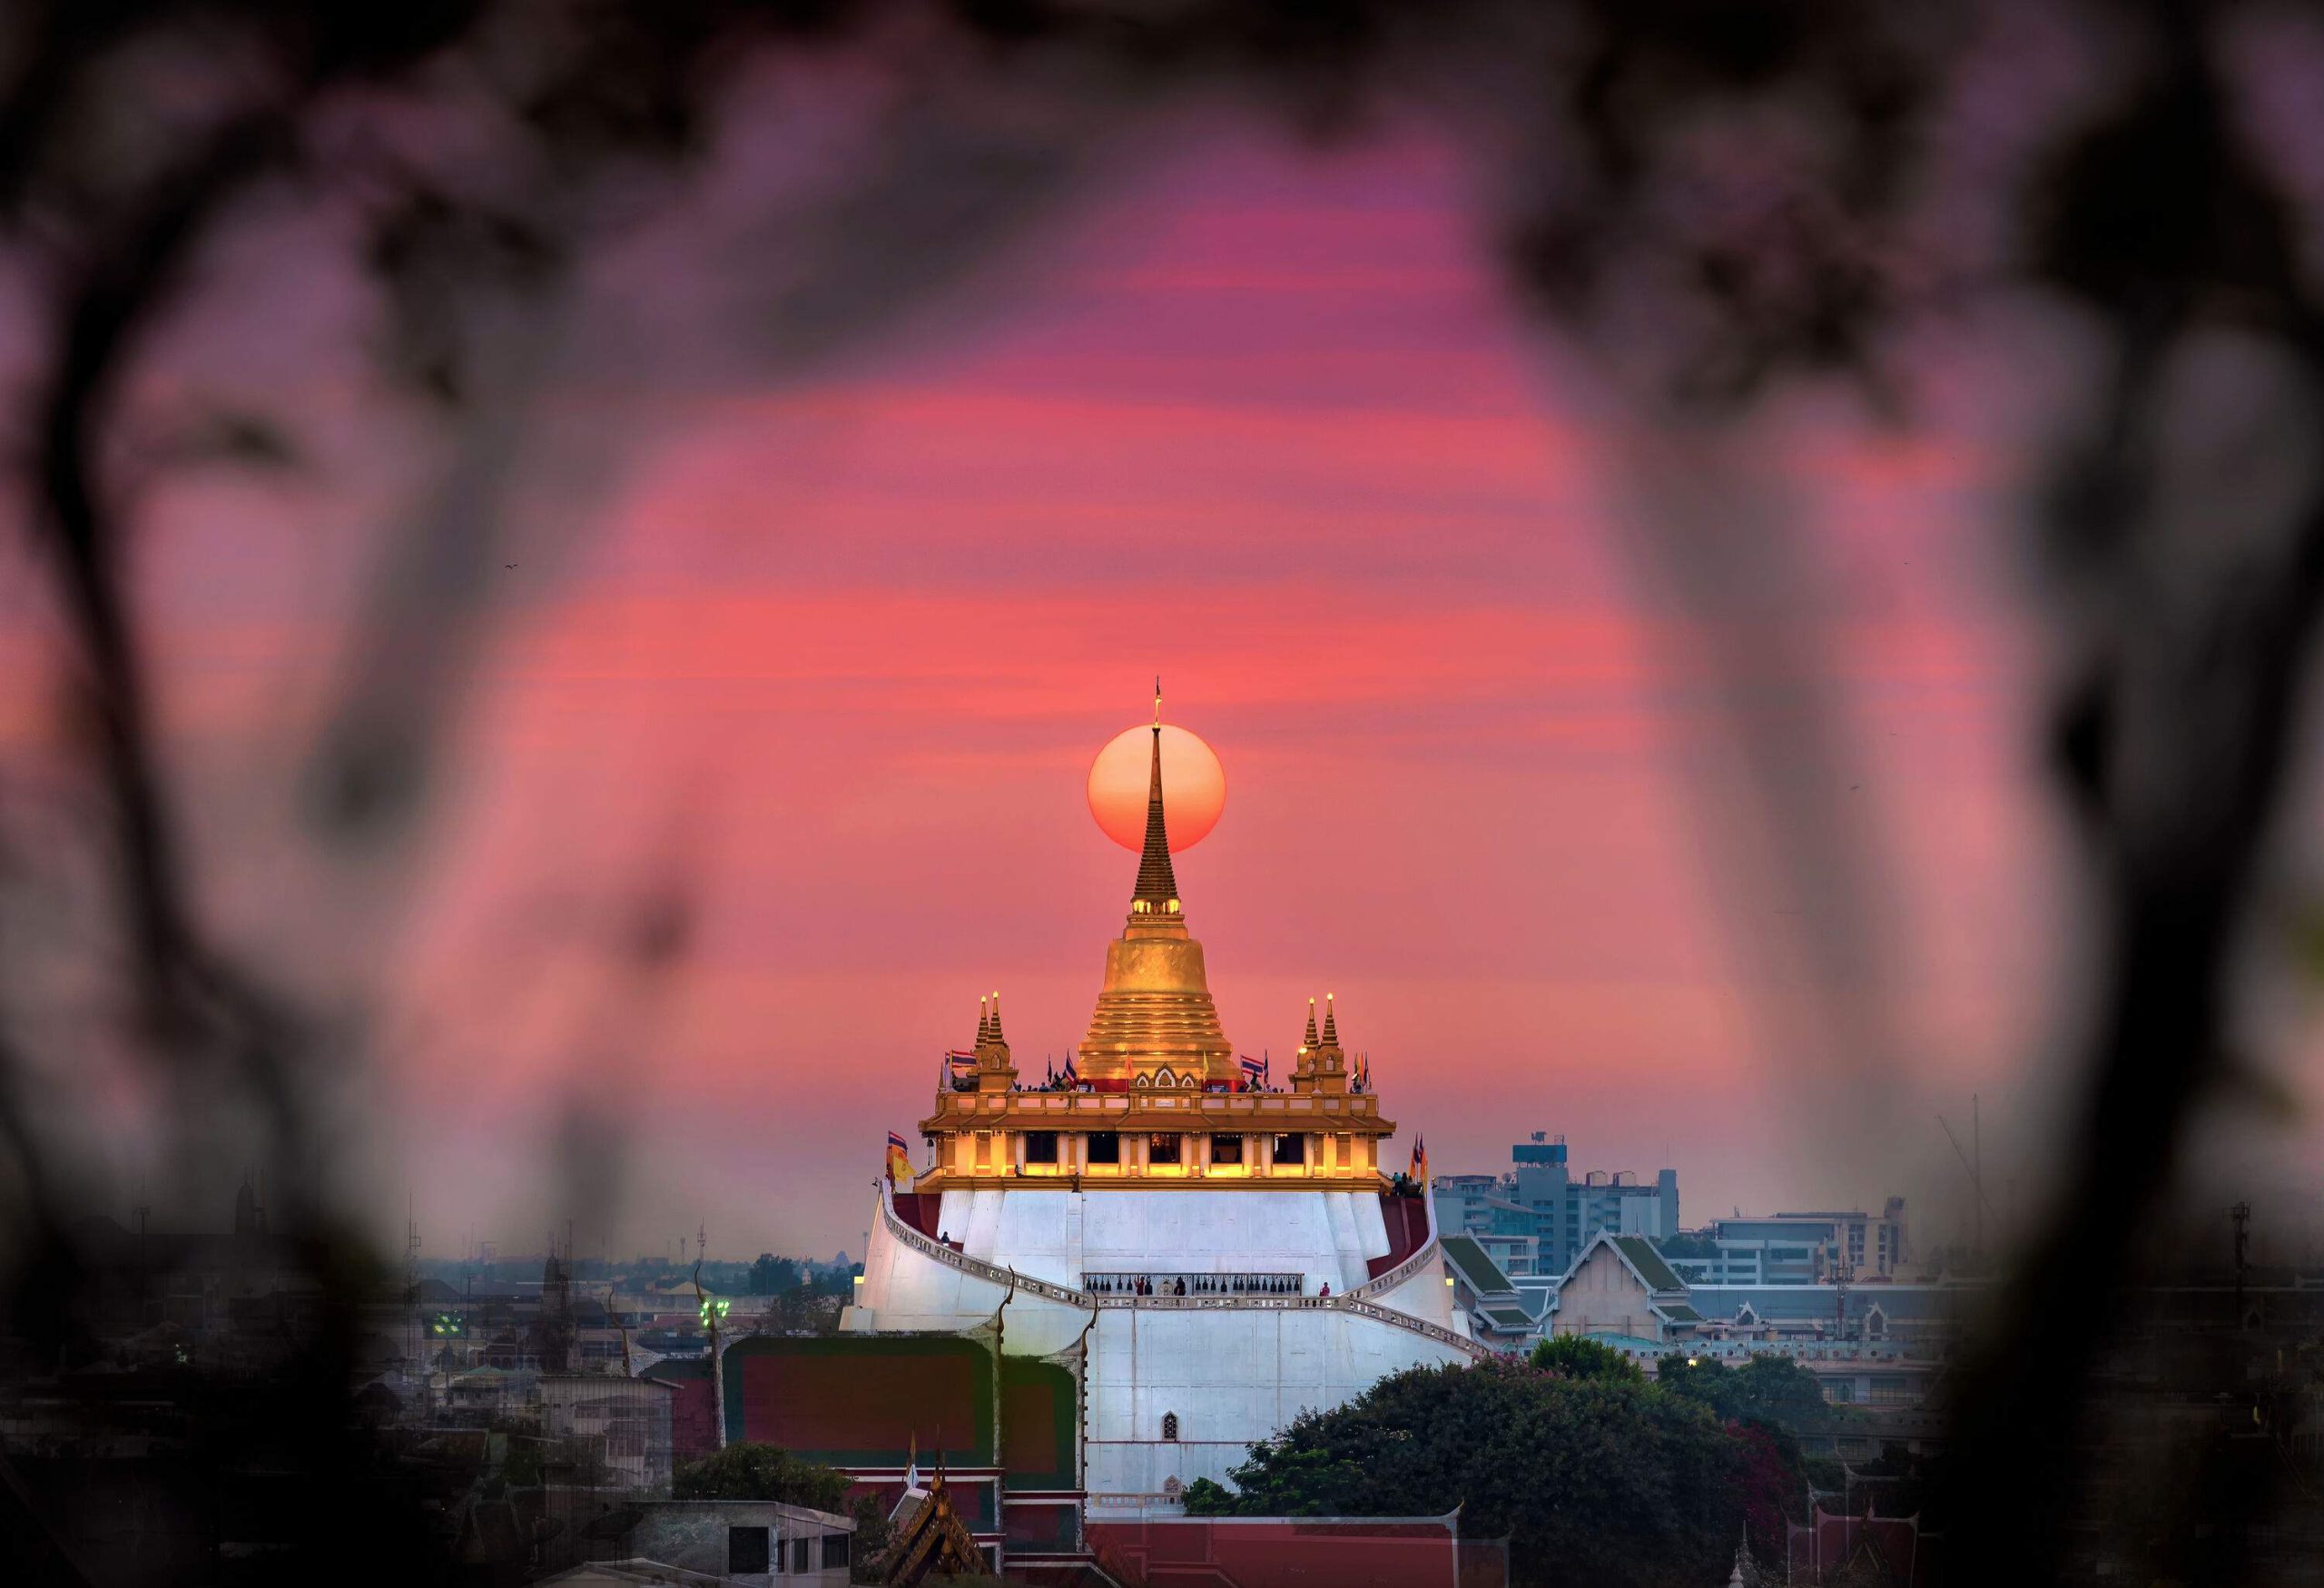 Wat Saket is a temple located on a man-made hill with a golden bell-shaped chedi with a towering spire.